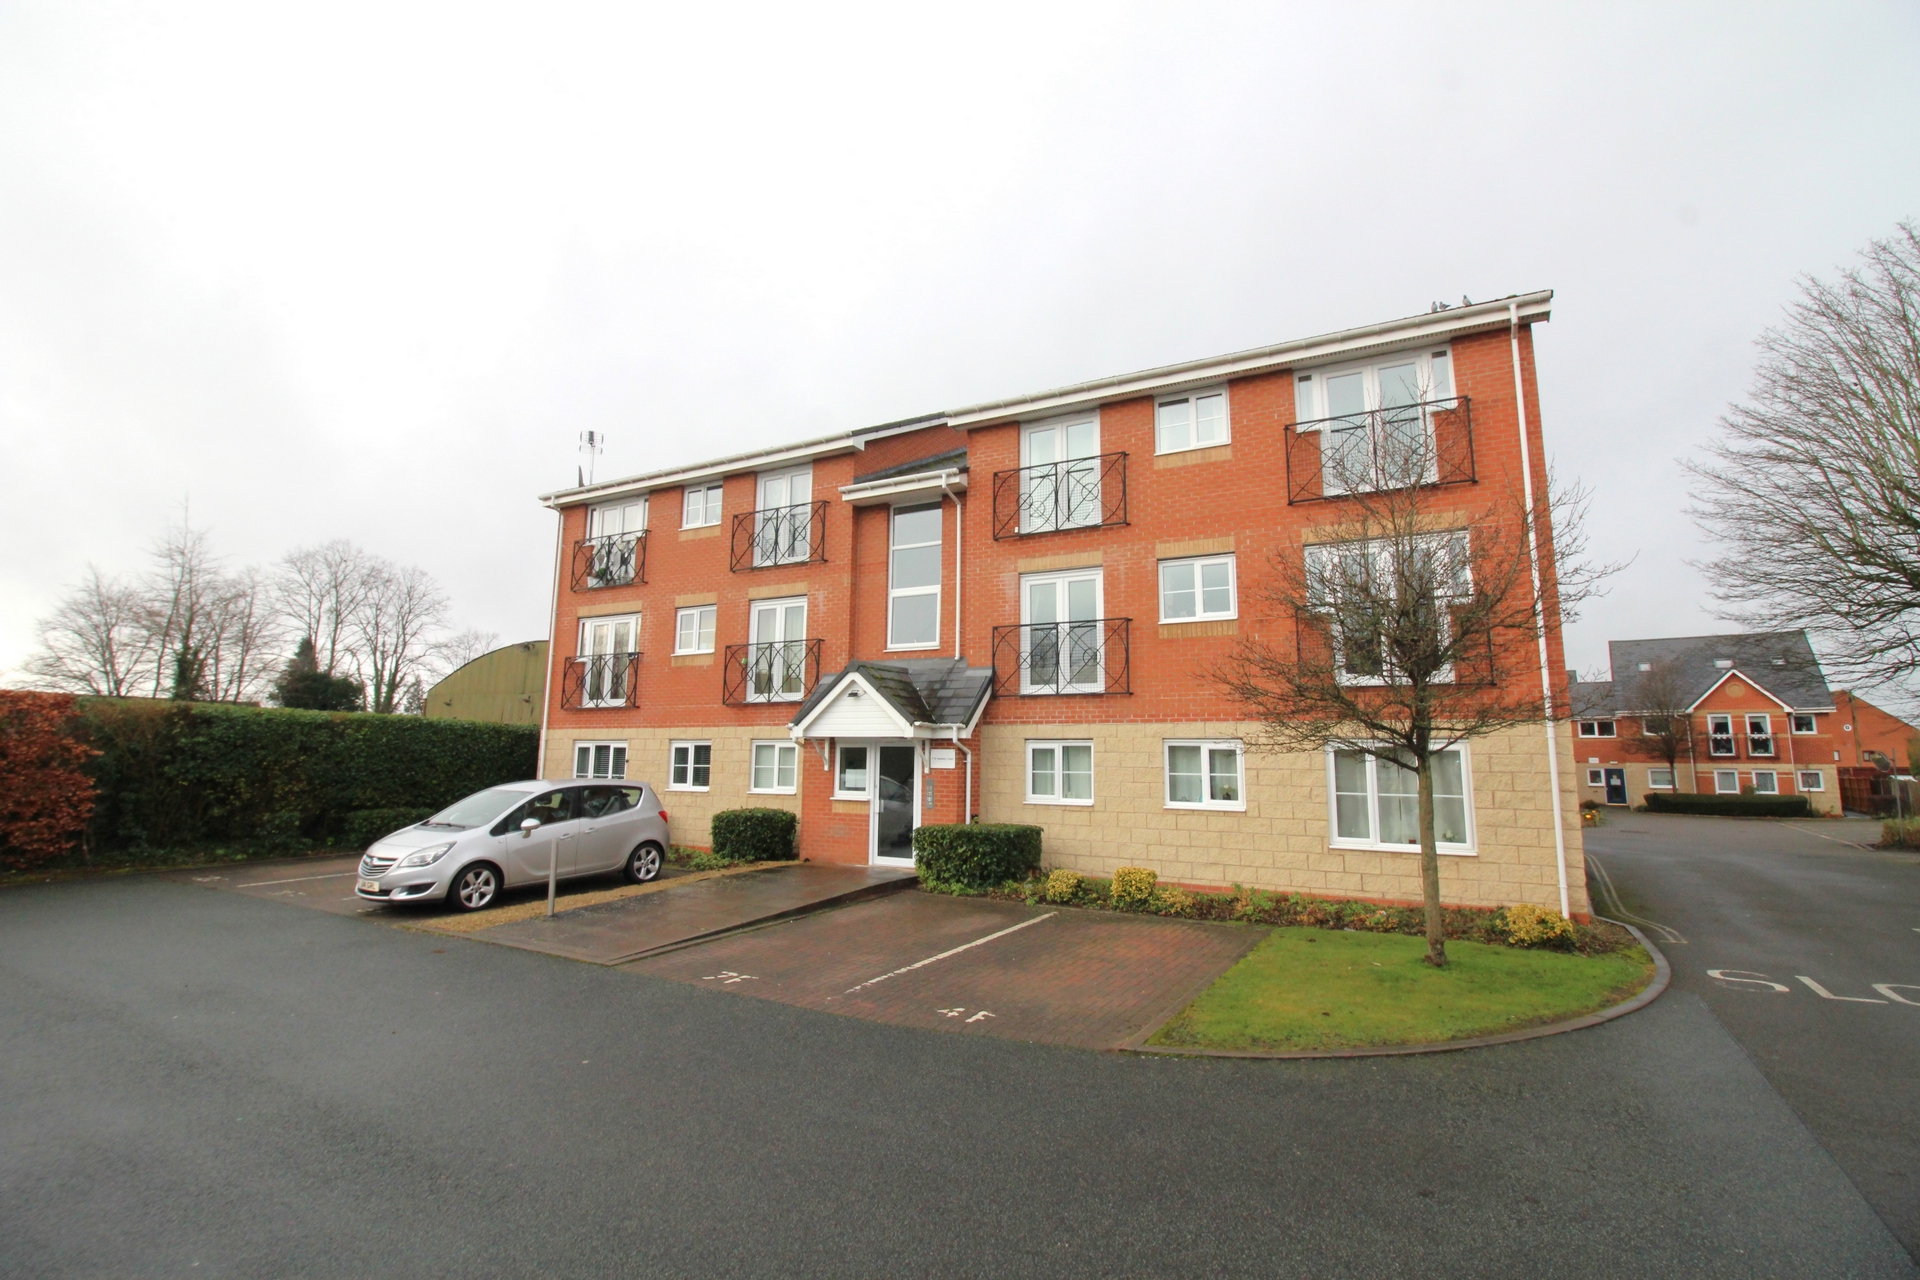 Feathers Court, MacArthur Way, Stourport on Severn, DY13